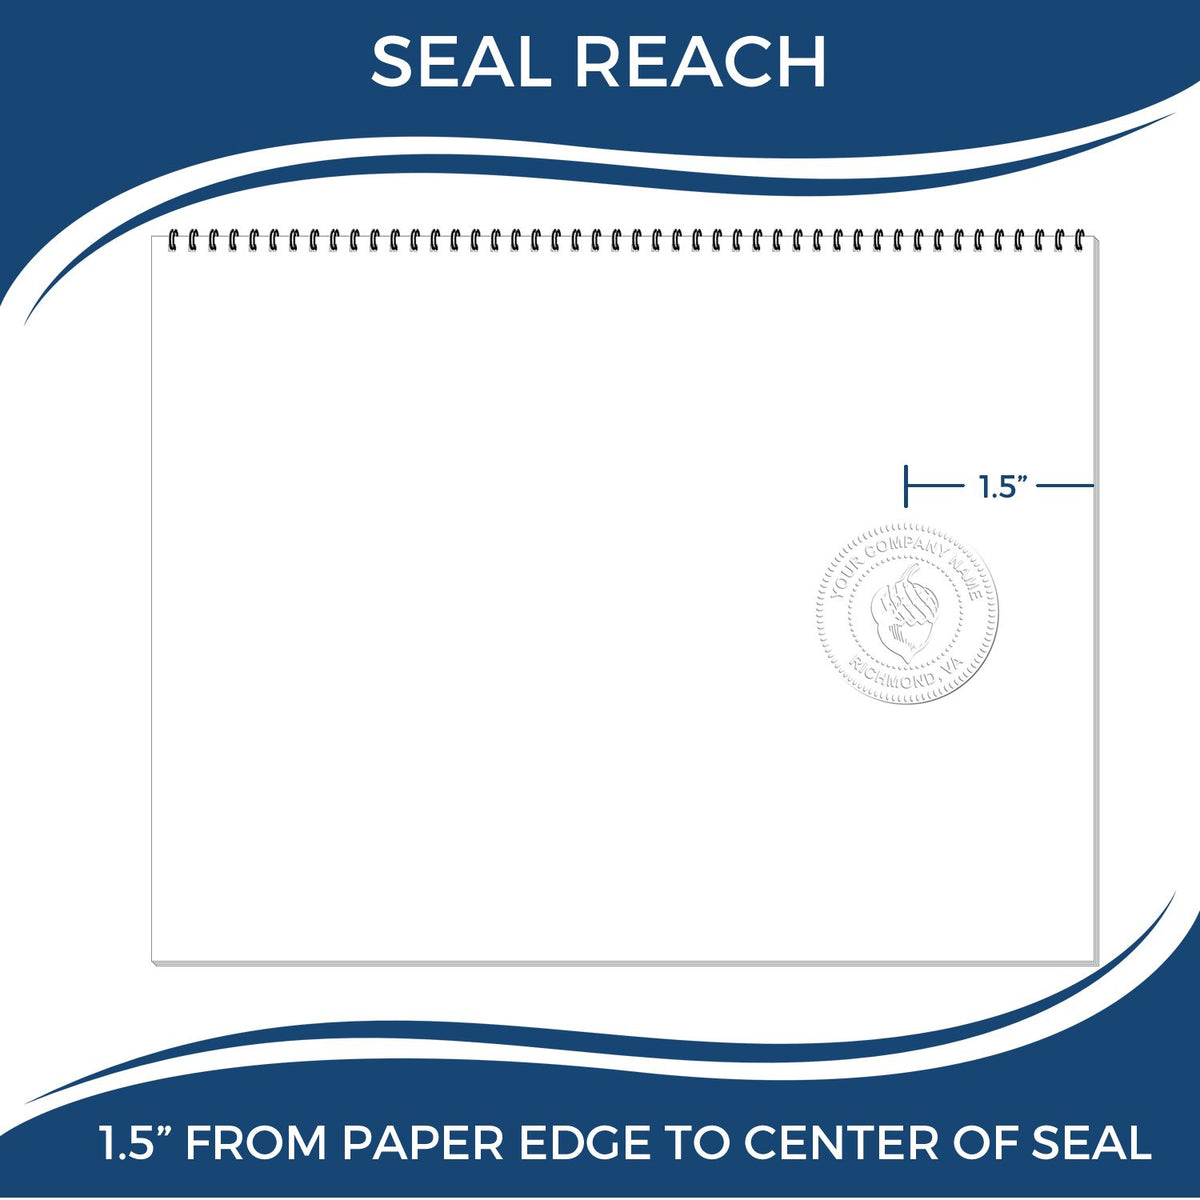 An infographic showing the seal reach which is represented by a ruler and a miniature seal image of the Hybrid North Dakota Landscape Architect Seal